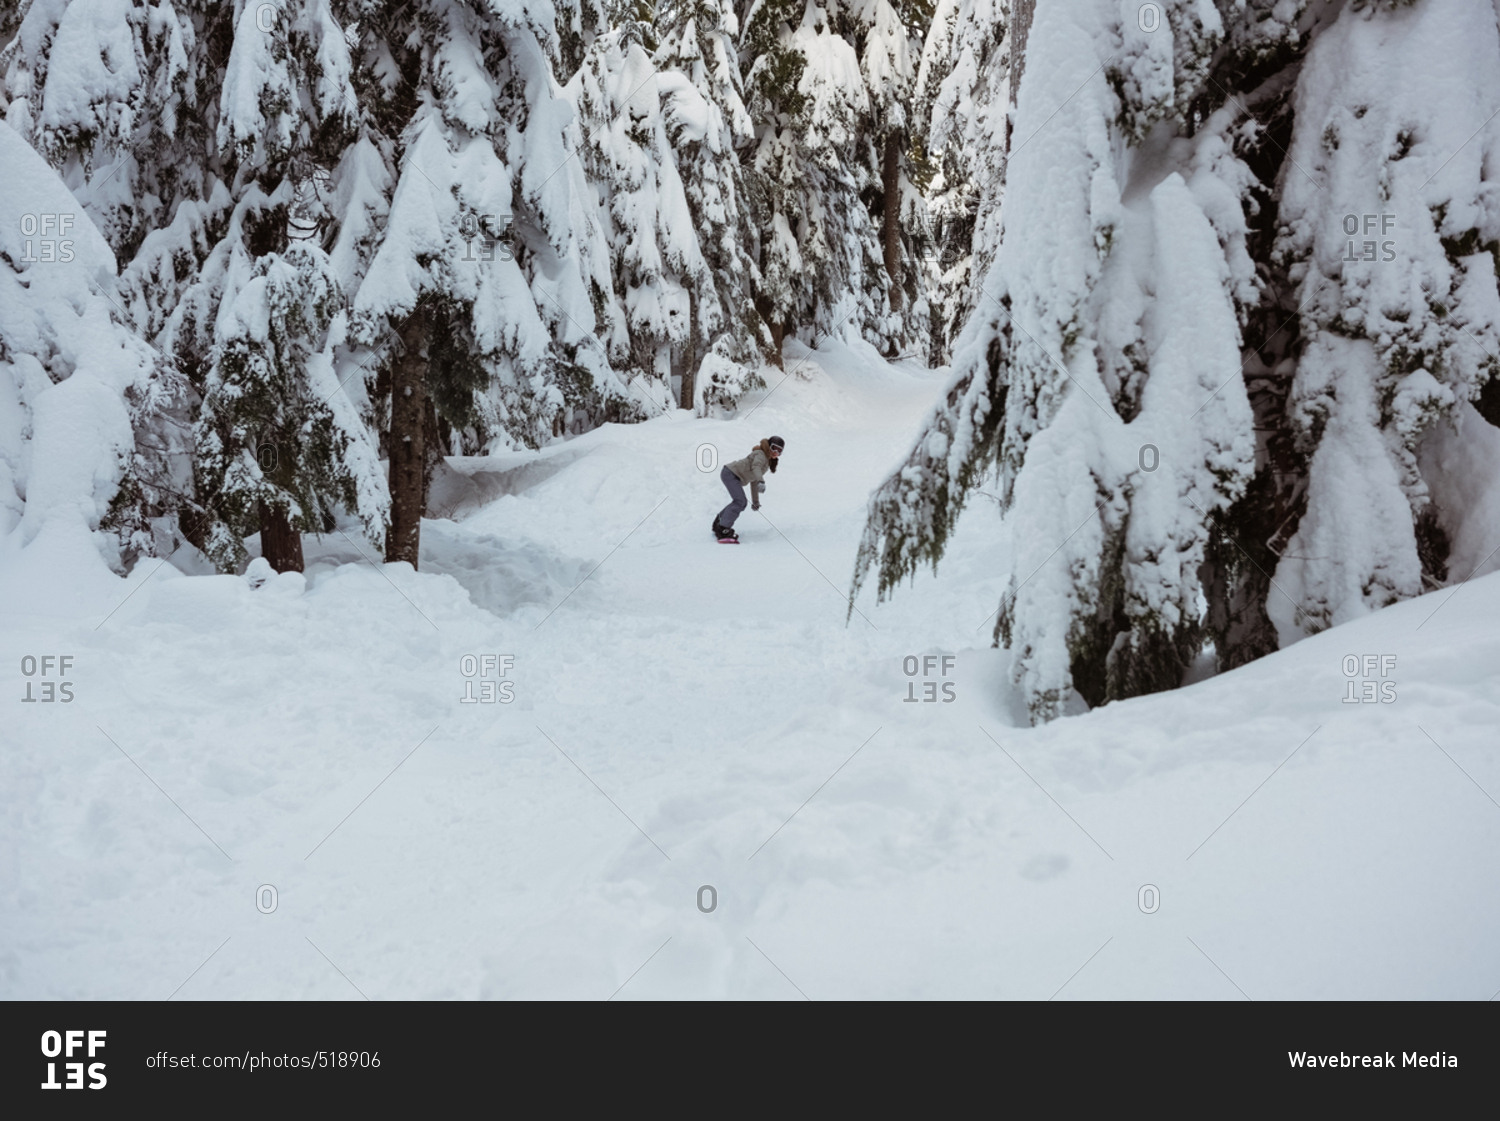 Woman snowboarding through snow covered pine trees